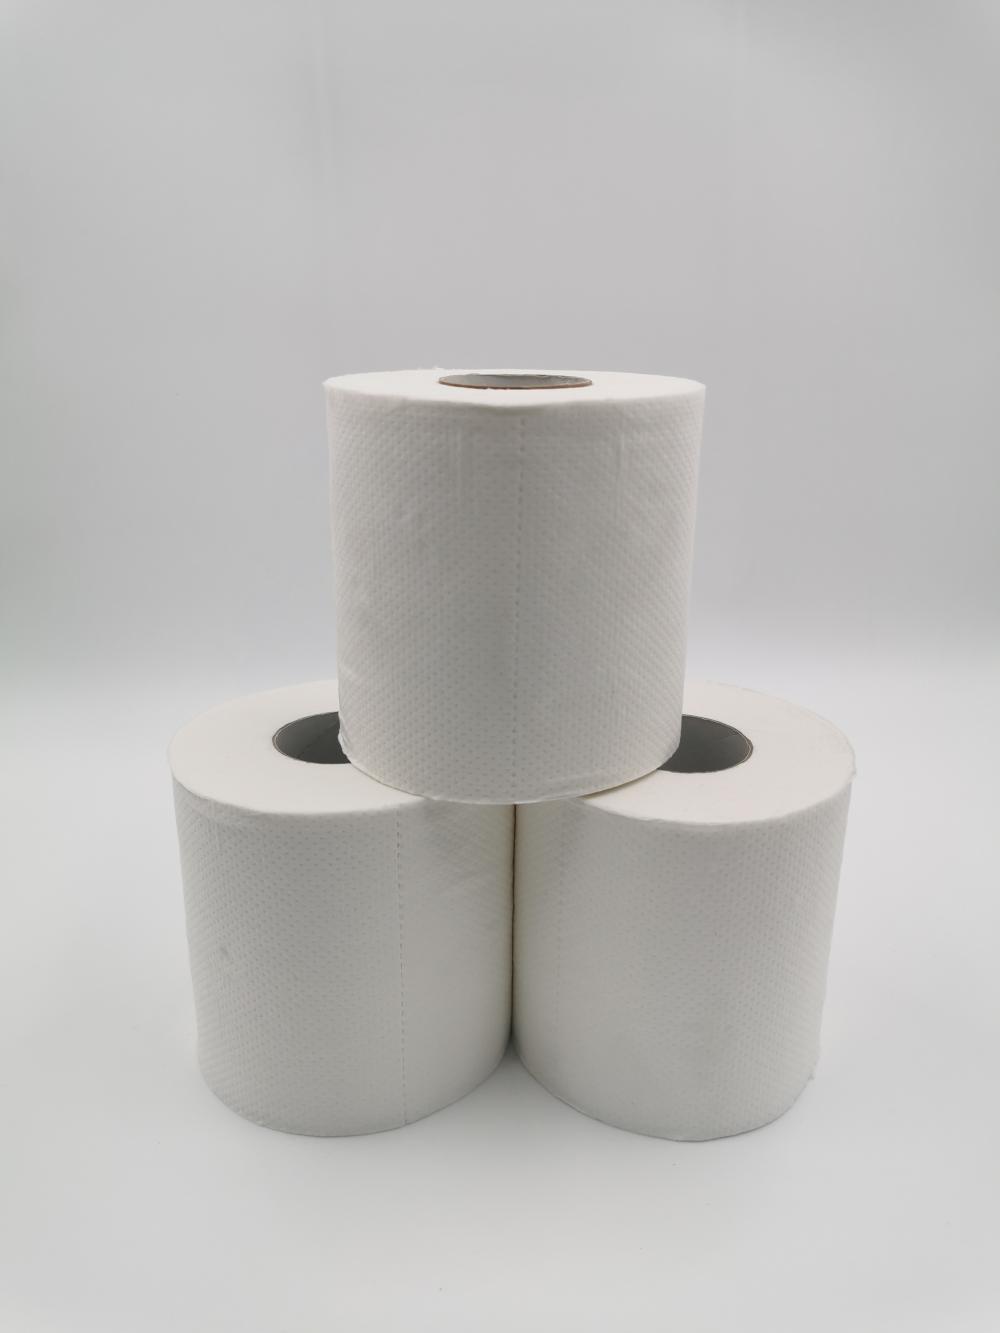 Standard toilet paper used in hotels